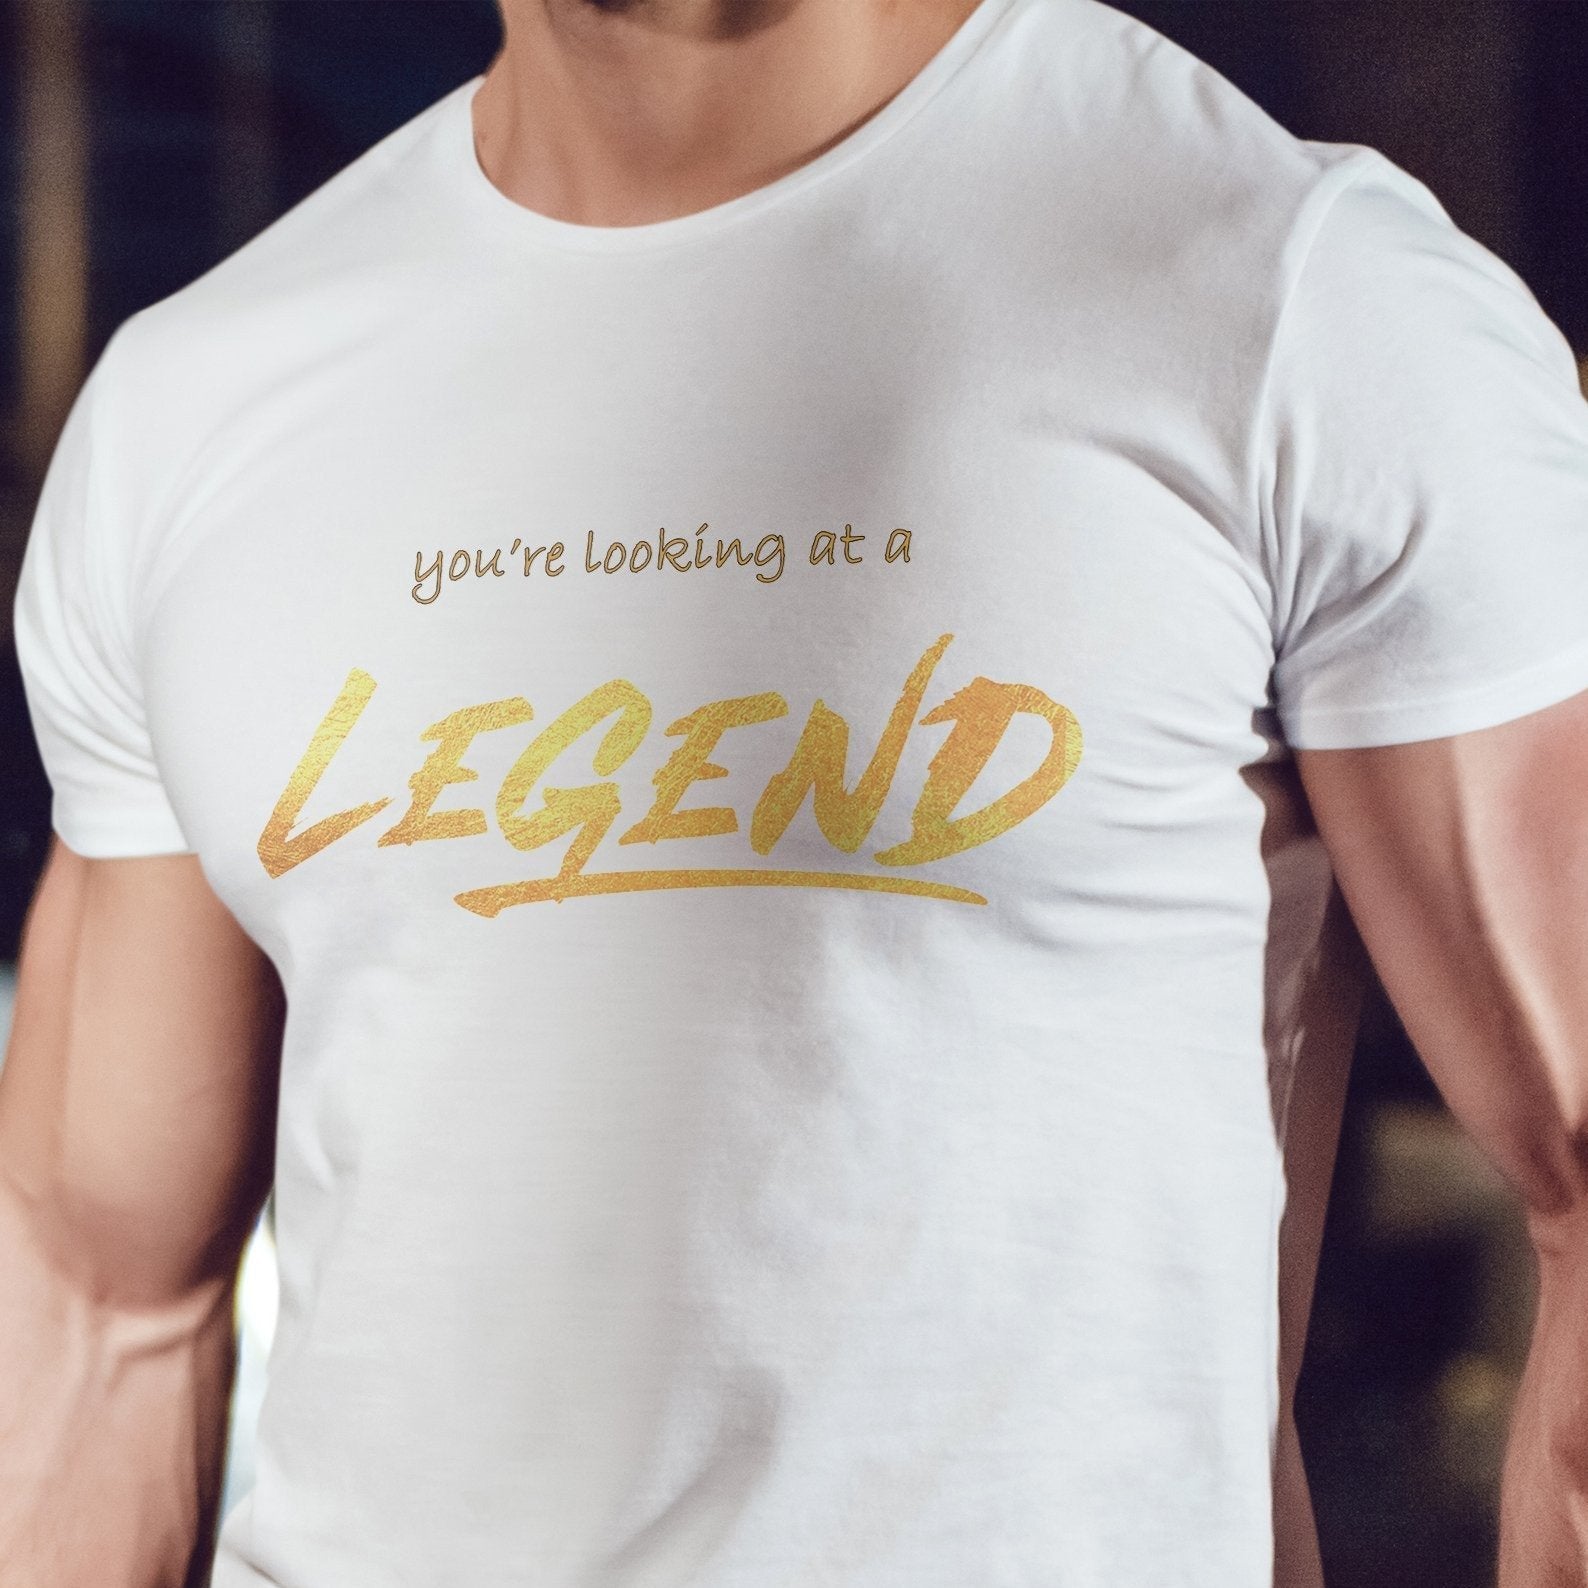 You're looking at a legand - My Custom Tee Party